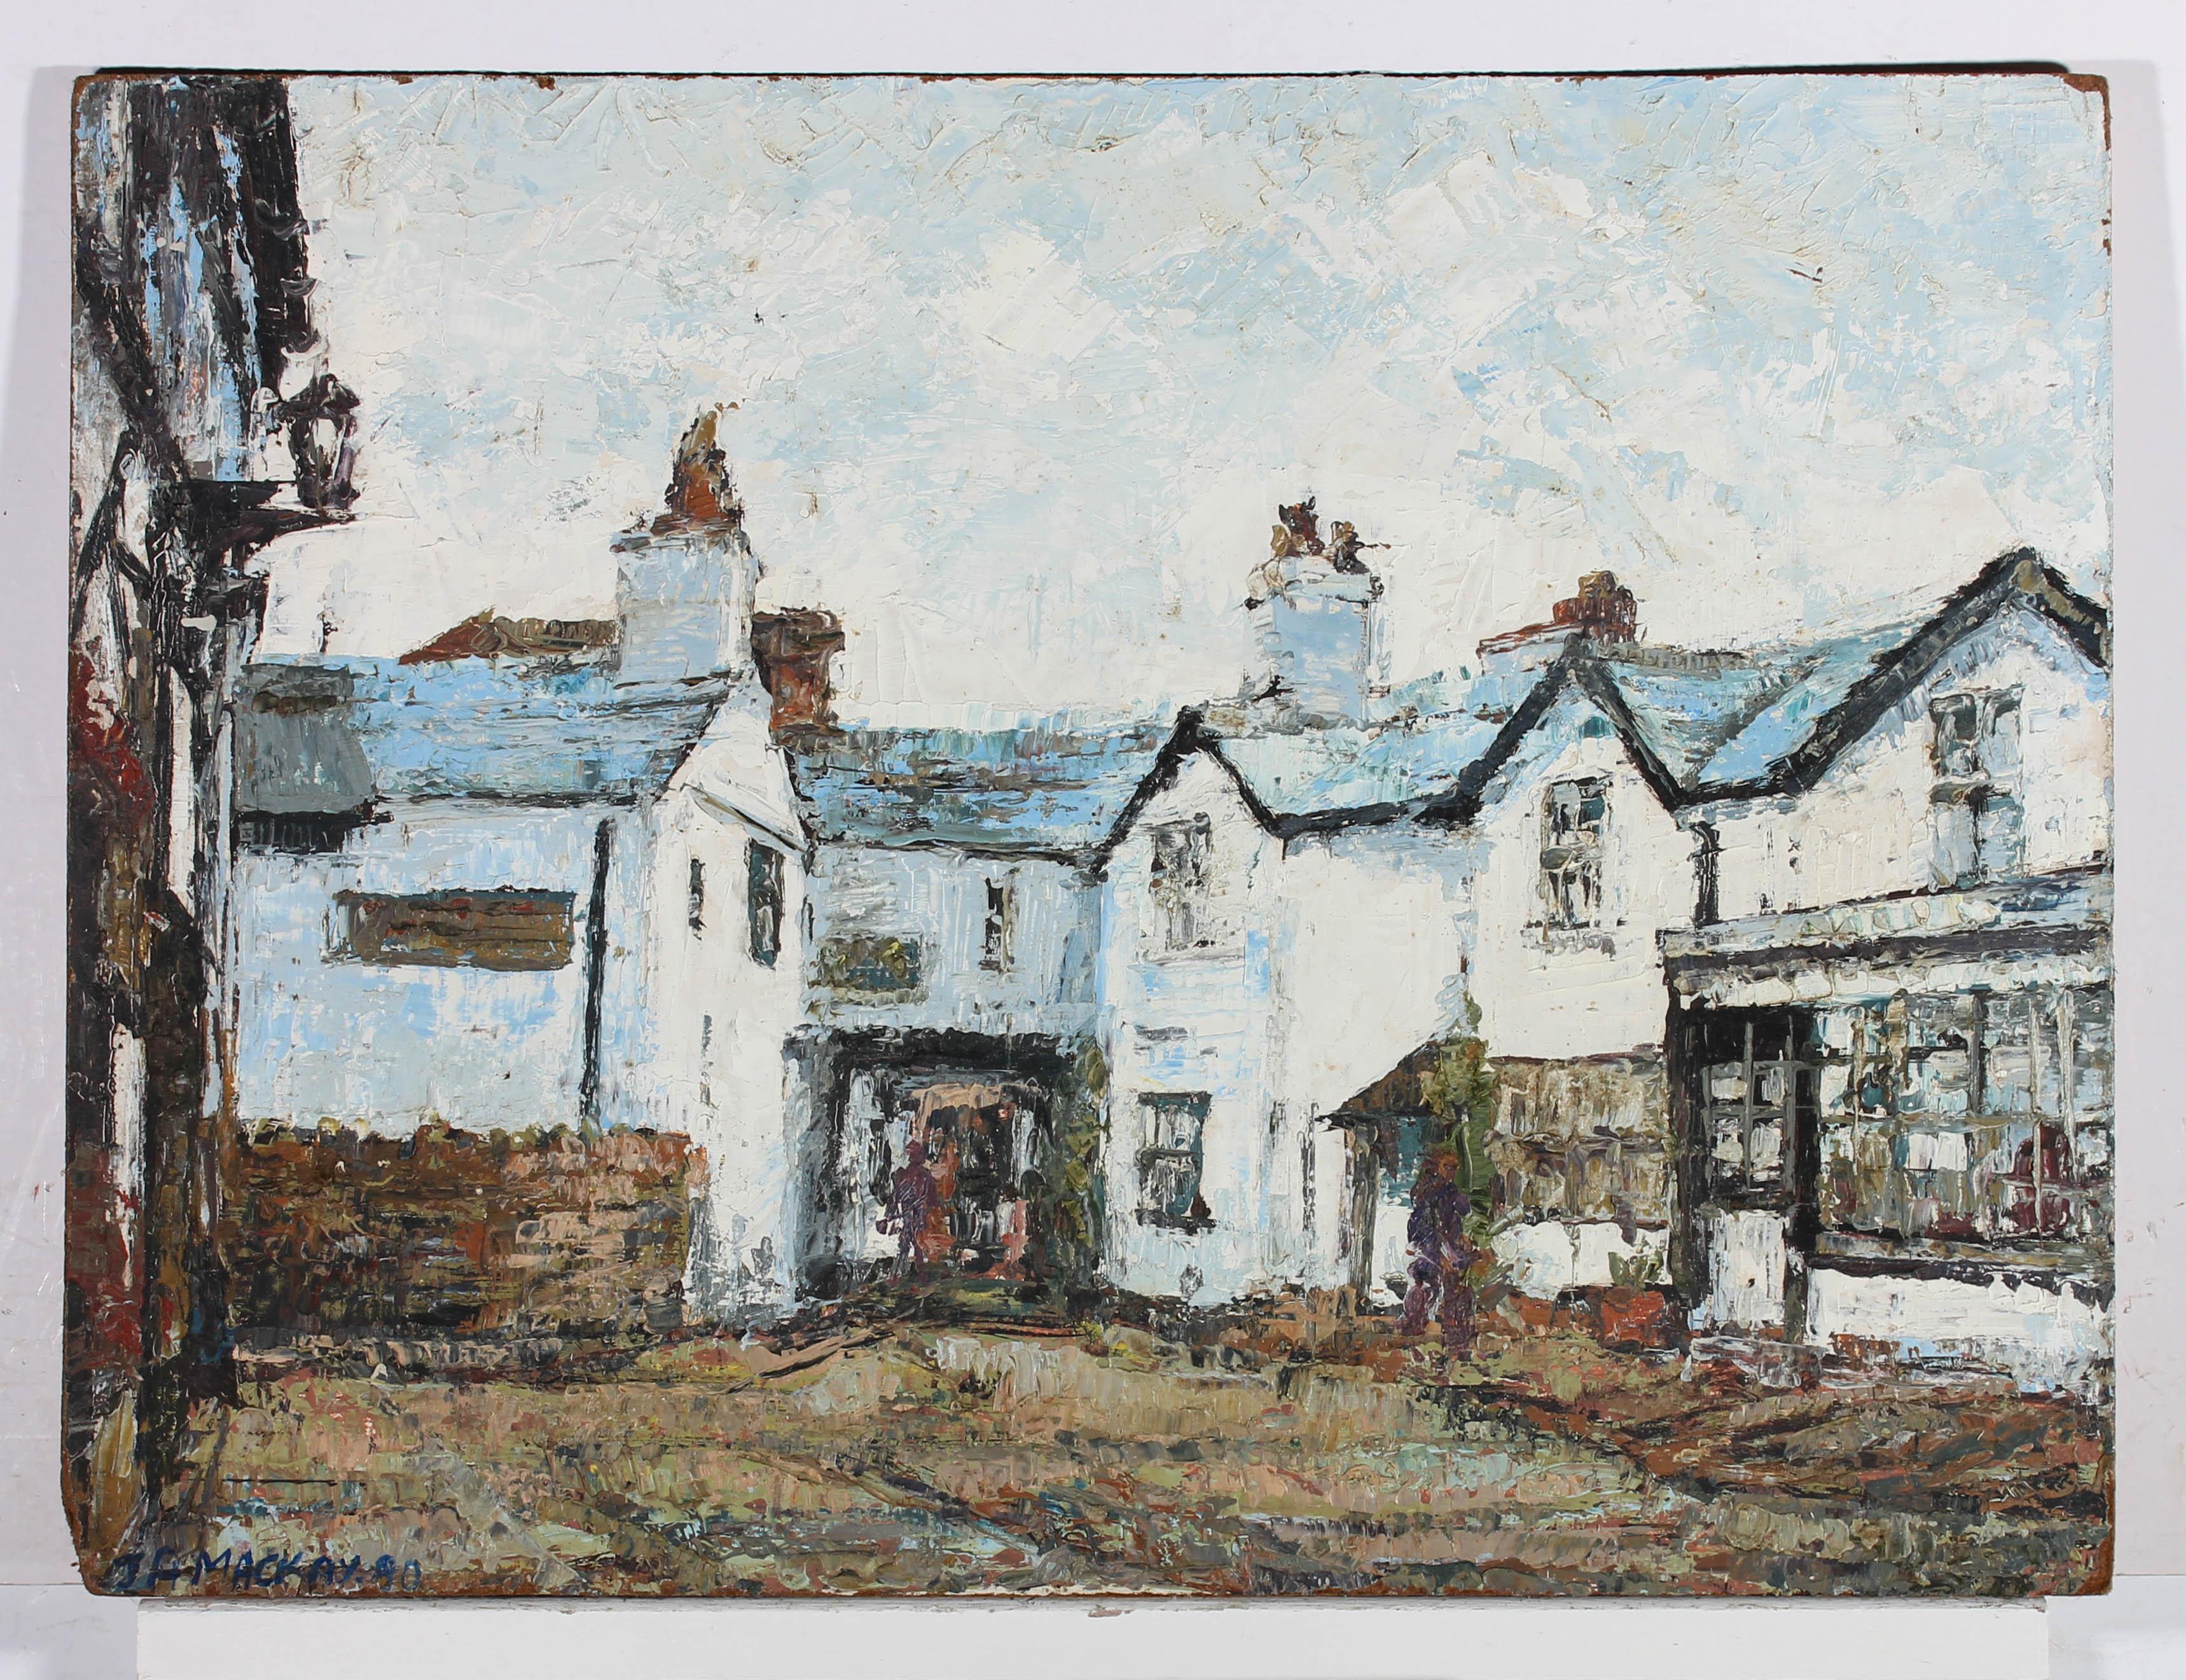 A striking impasto scene depicting a historical town courtyard and white painted, stone buildings by J A Mackay. Signed to the lower left-hand corner. On board.